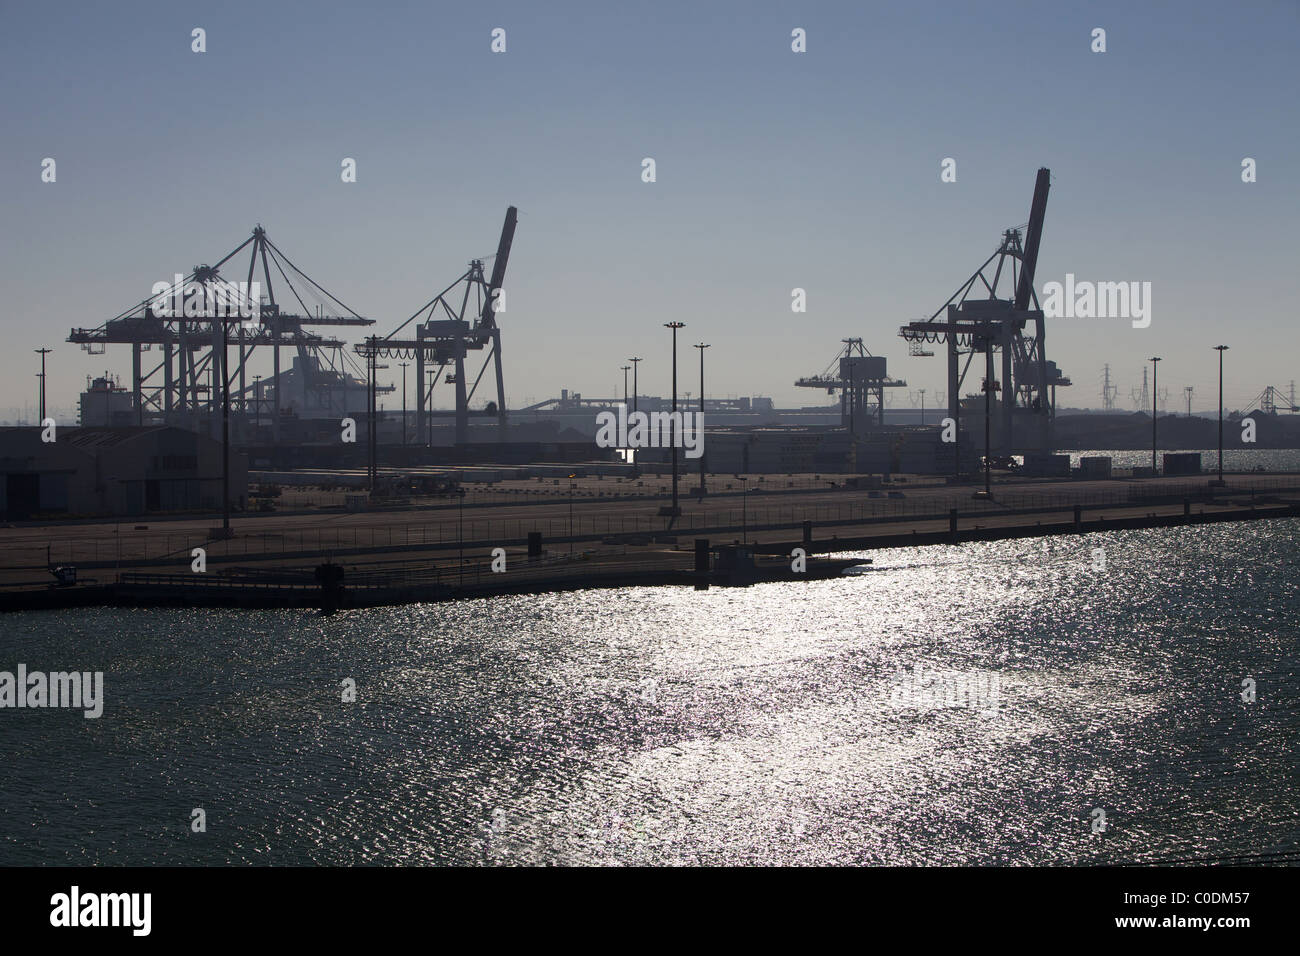 Evening view of an industrial container port with cranes and containers in the background Stock Photo